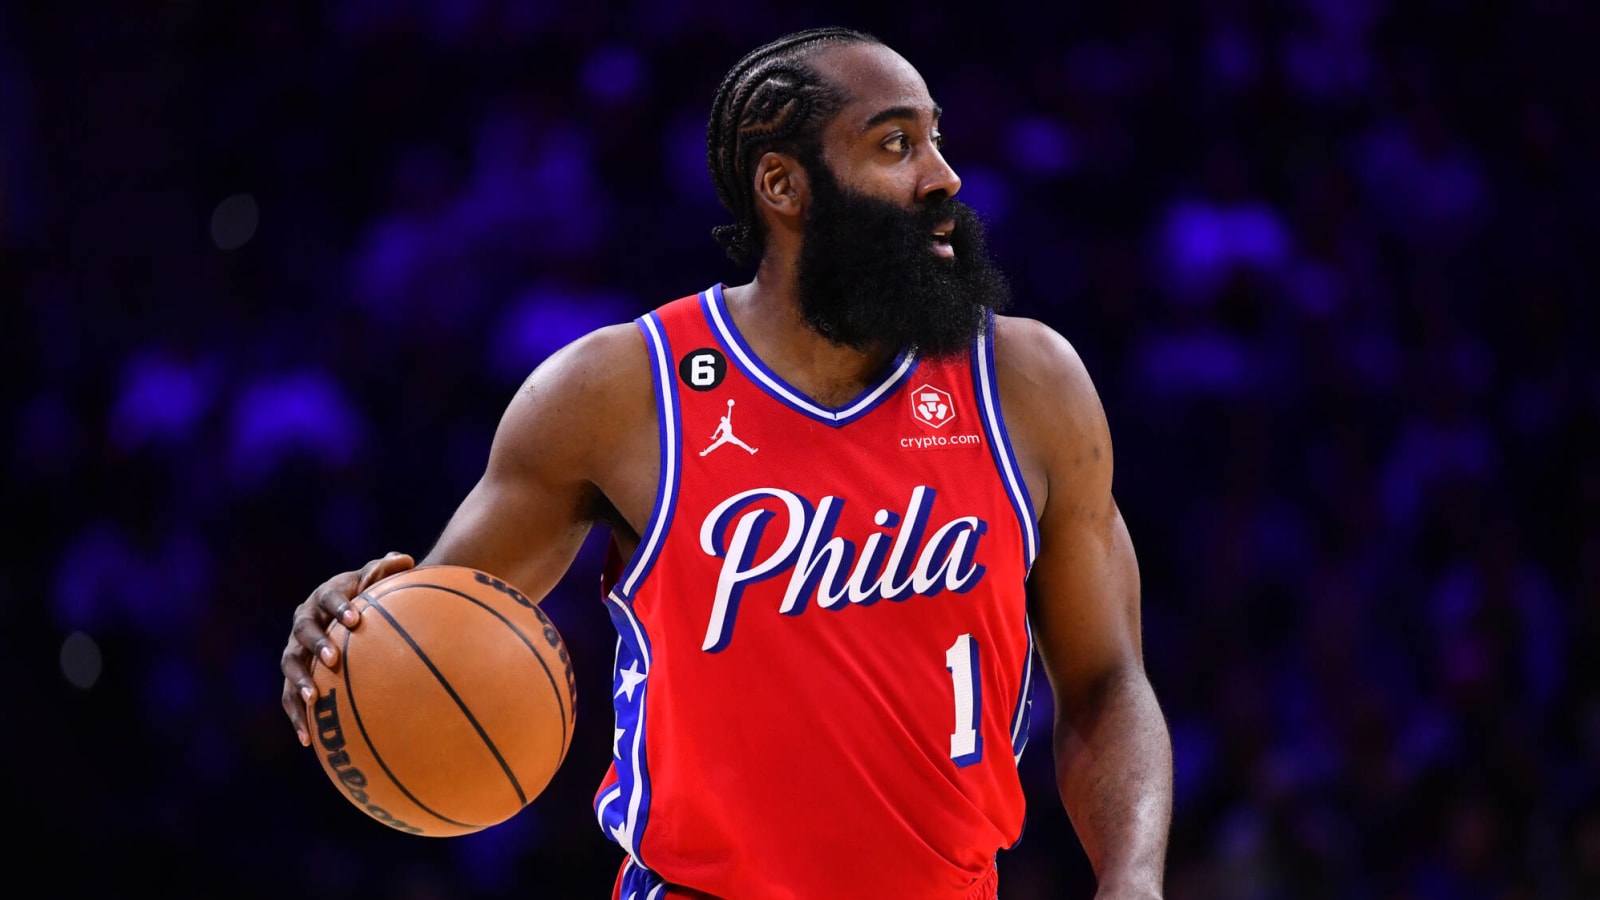 Harden ties 76ers' franchise record with 21 assists in win